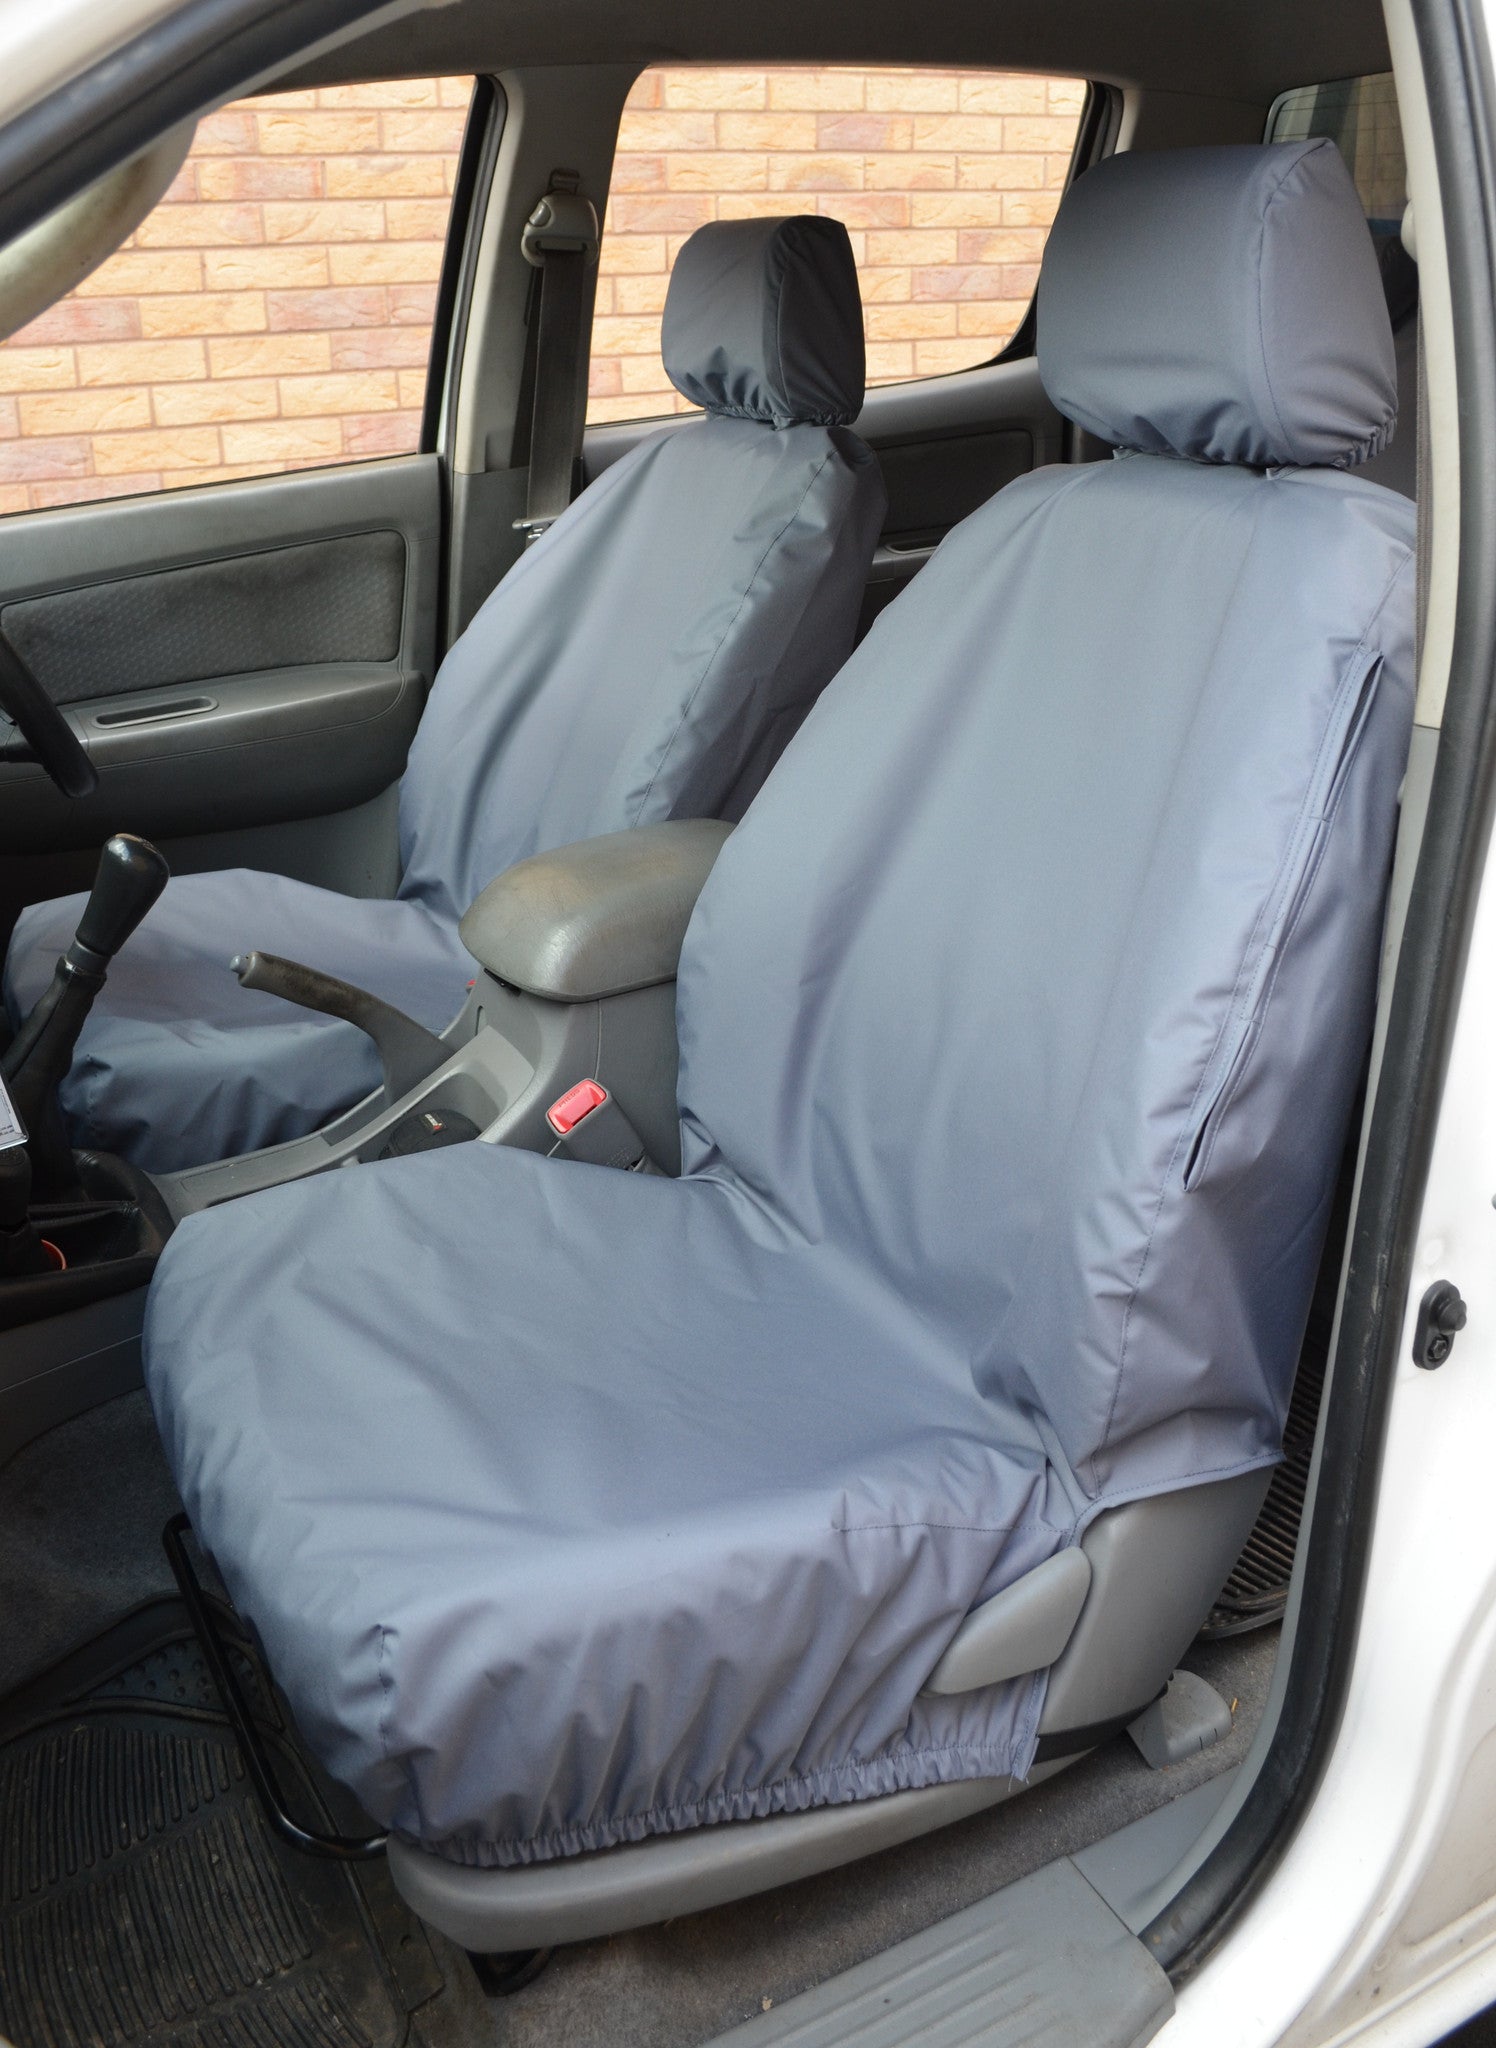 Toyota Hilux Invincible 2005 - 2016 Seat Covers Front Pair Seat Covers / Grey Turtle Covers Ltd